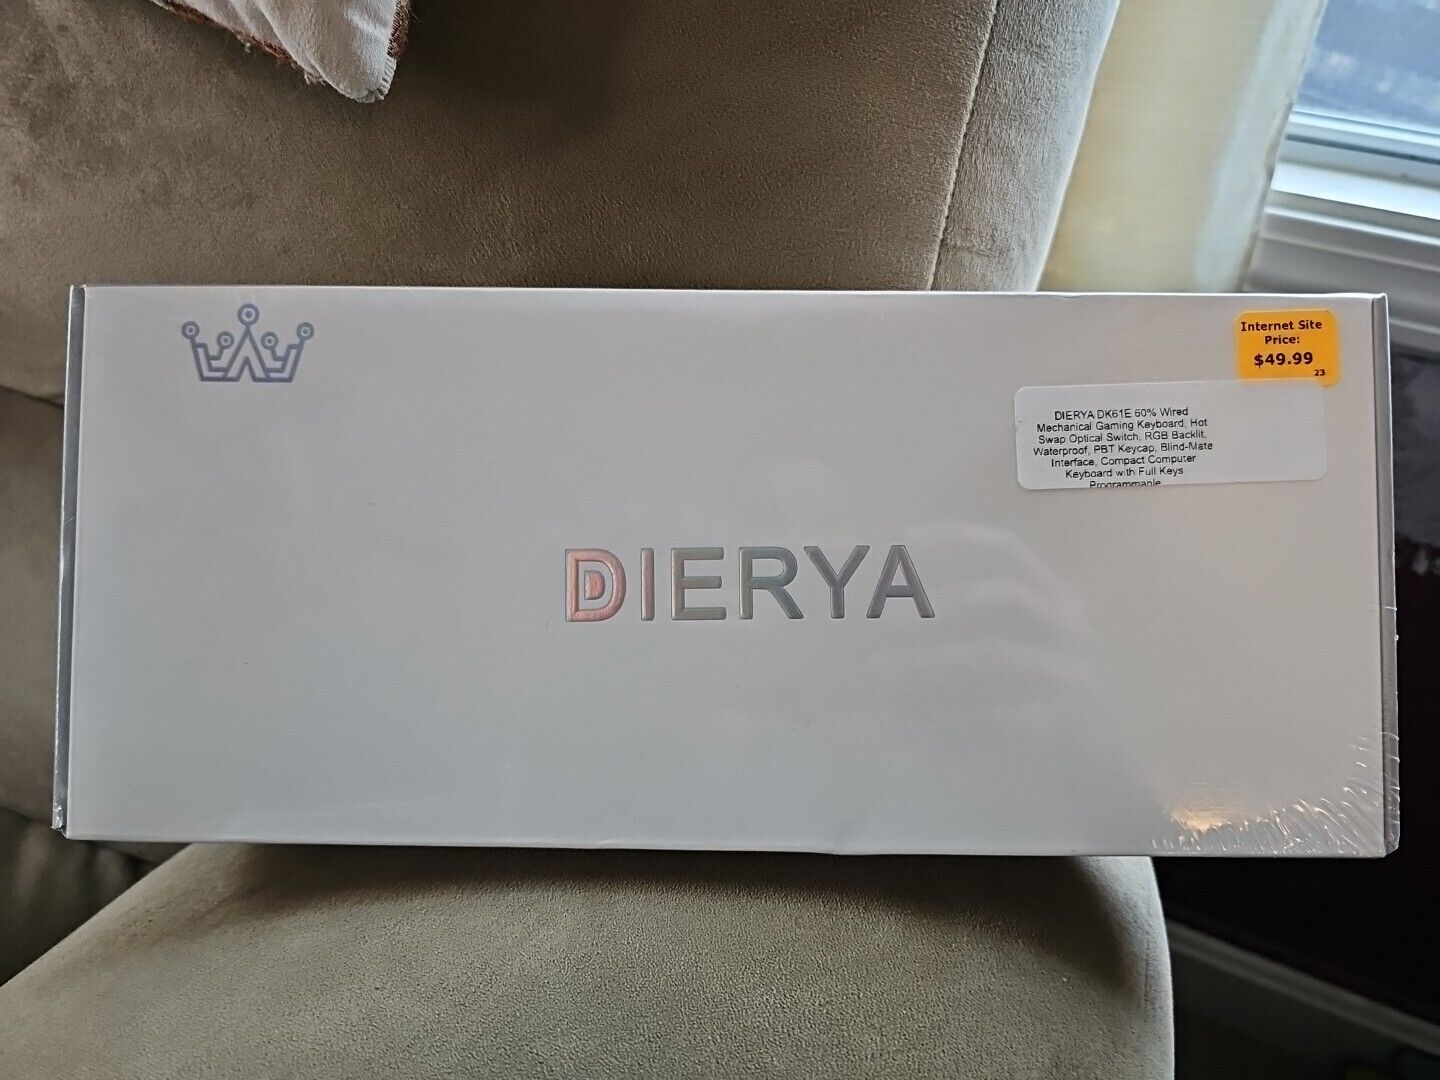 DIERYA 60% Mechanical Keyboard, DK61SE USB-C Wired Gaming with Blue Switches